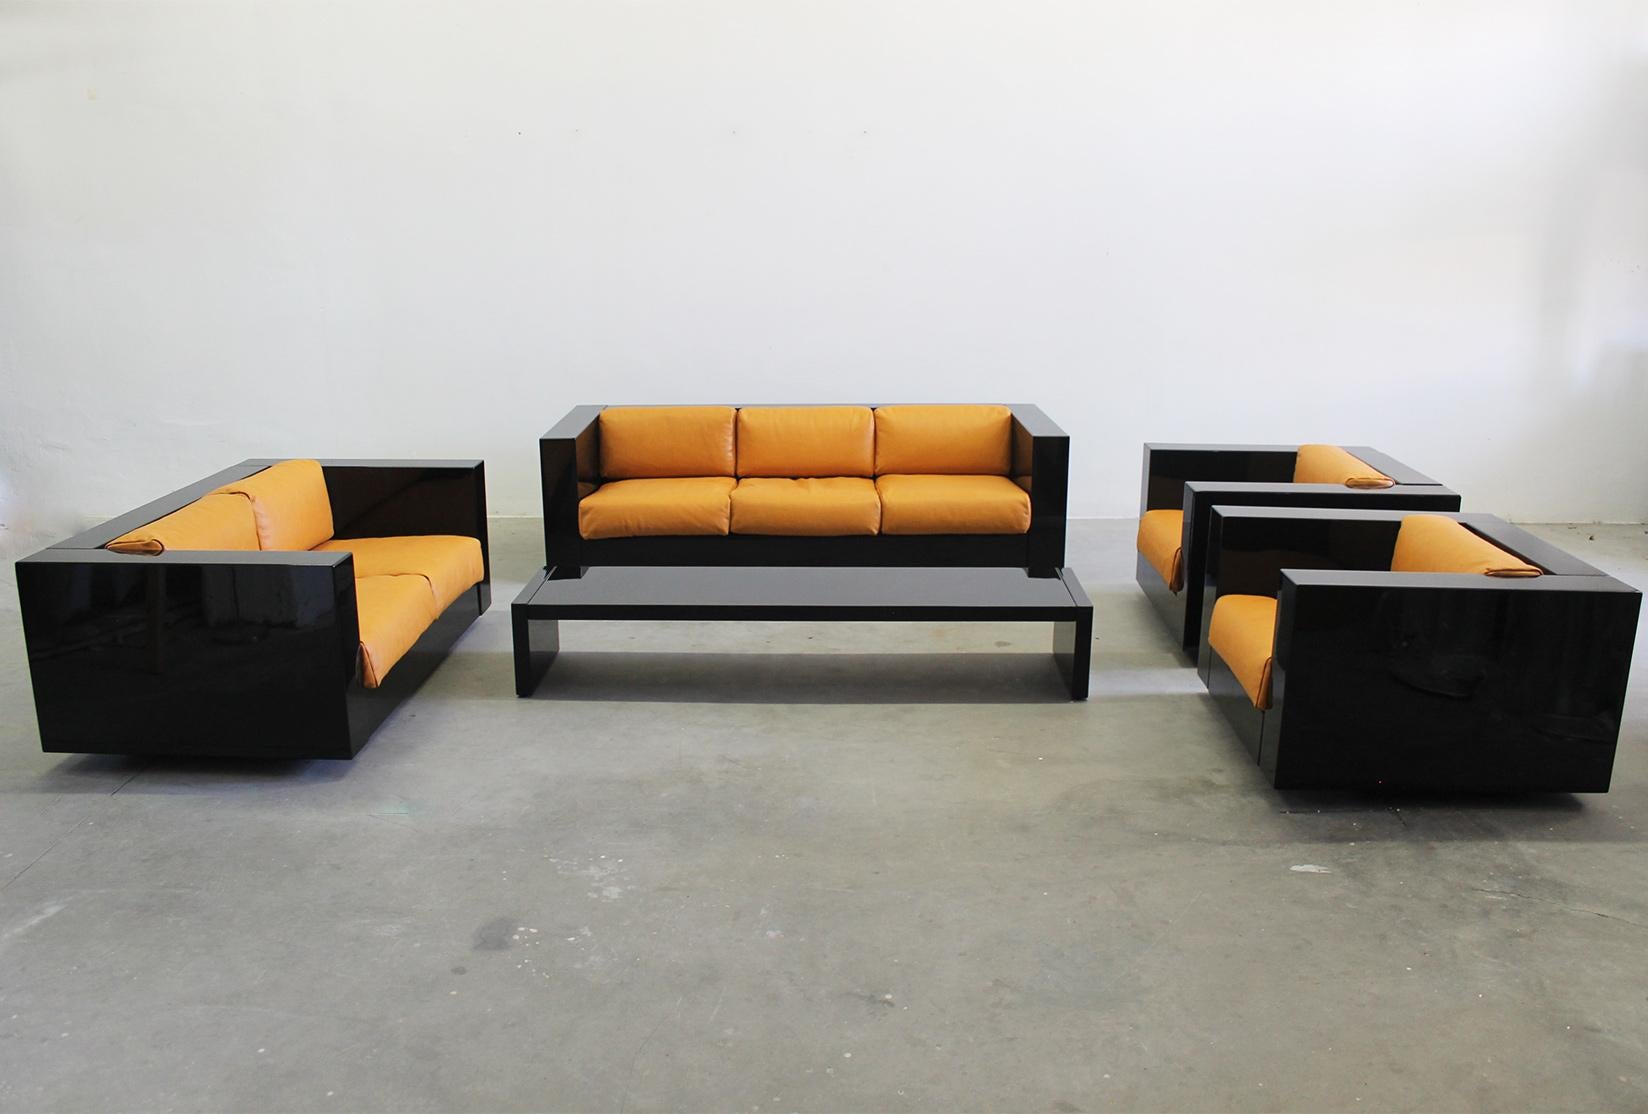 Saratoga living room set composed by a three-seater sofa, two-seater sofa, two armchairs and a low table with a structure in black lacquered wood, padded leather cushions and metal details. 

Designed by Massimo and Lella Vignelli and produced by